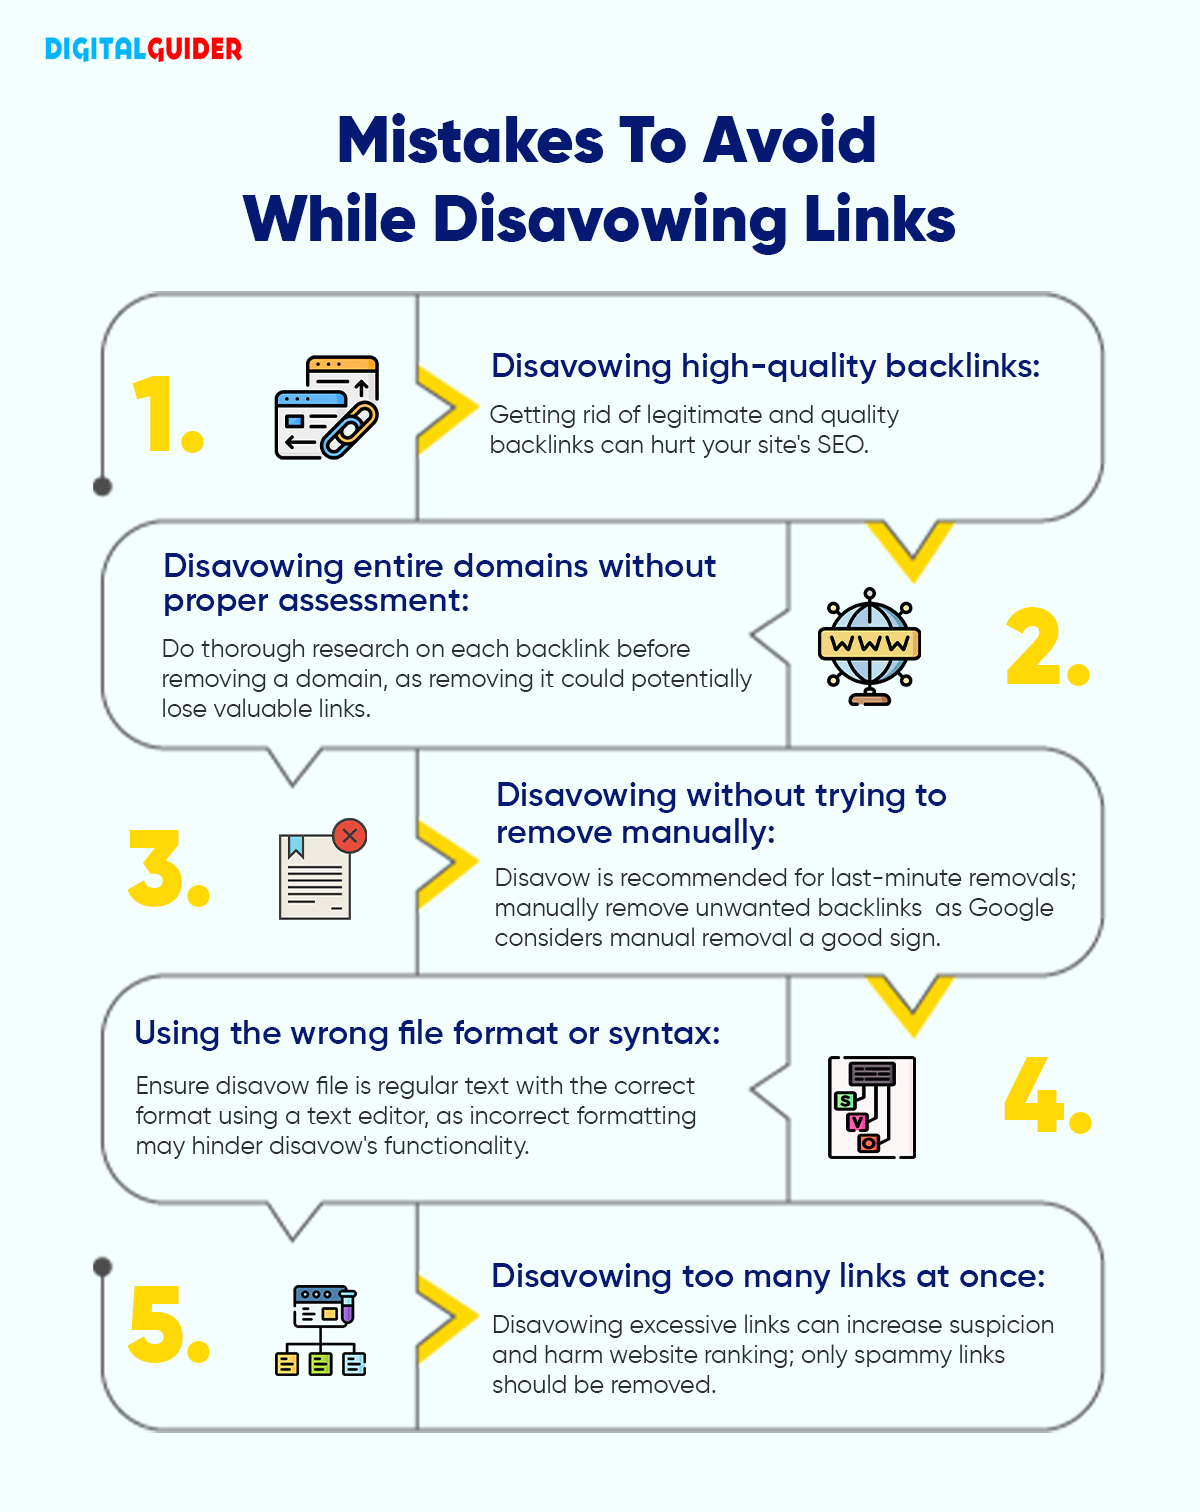 Mistakes To Avoid While Disavowing Links